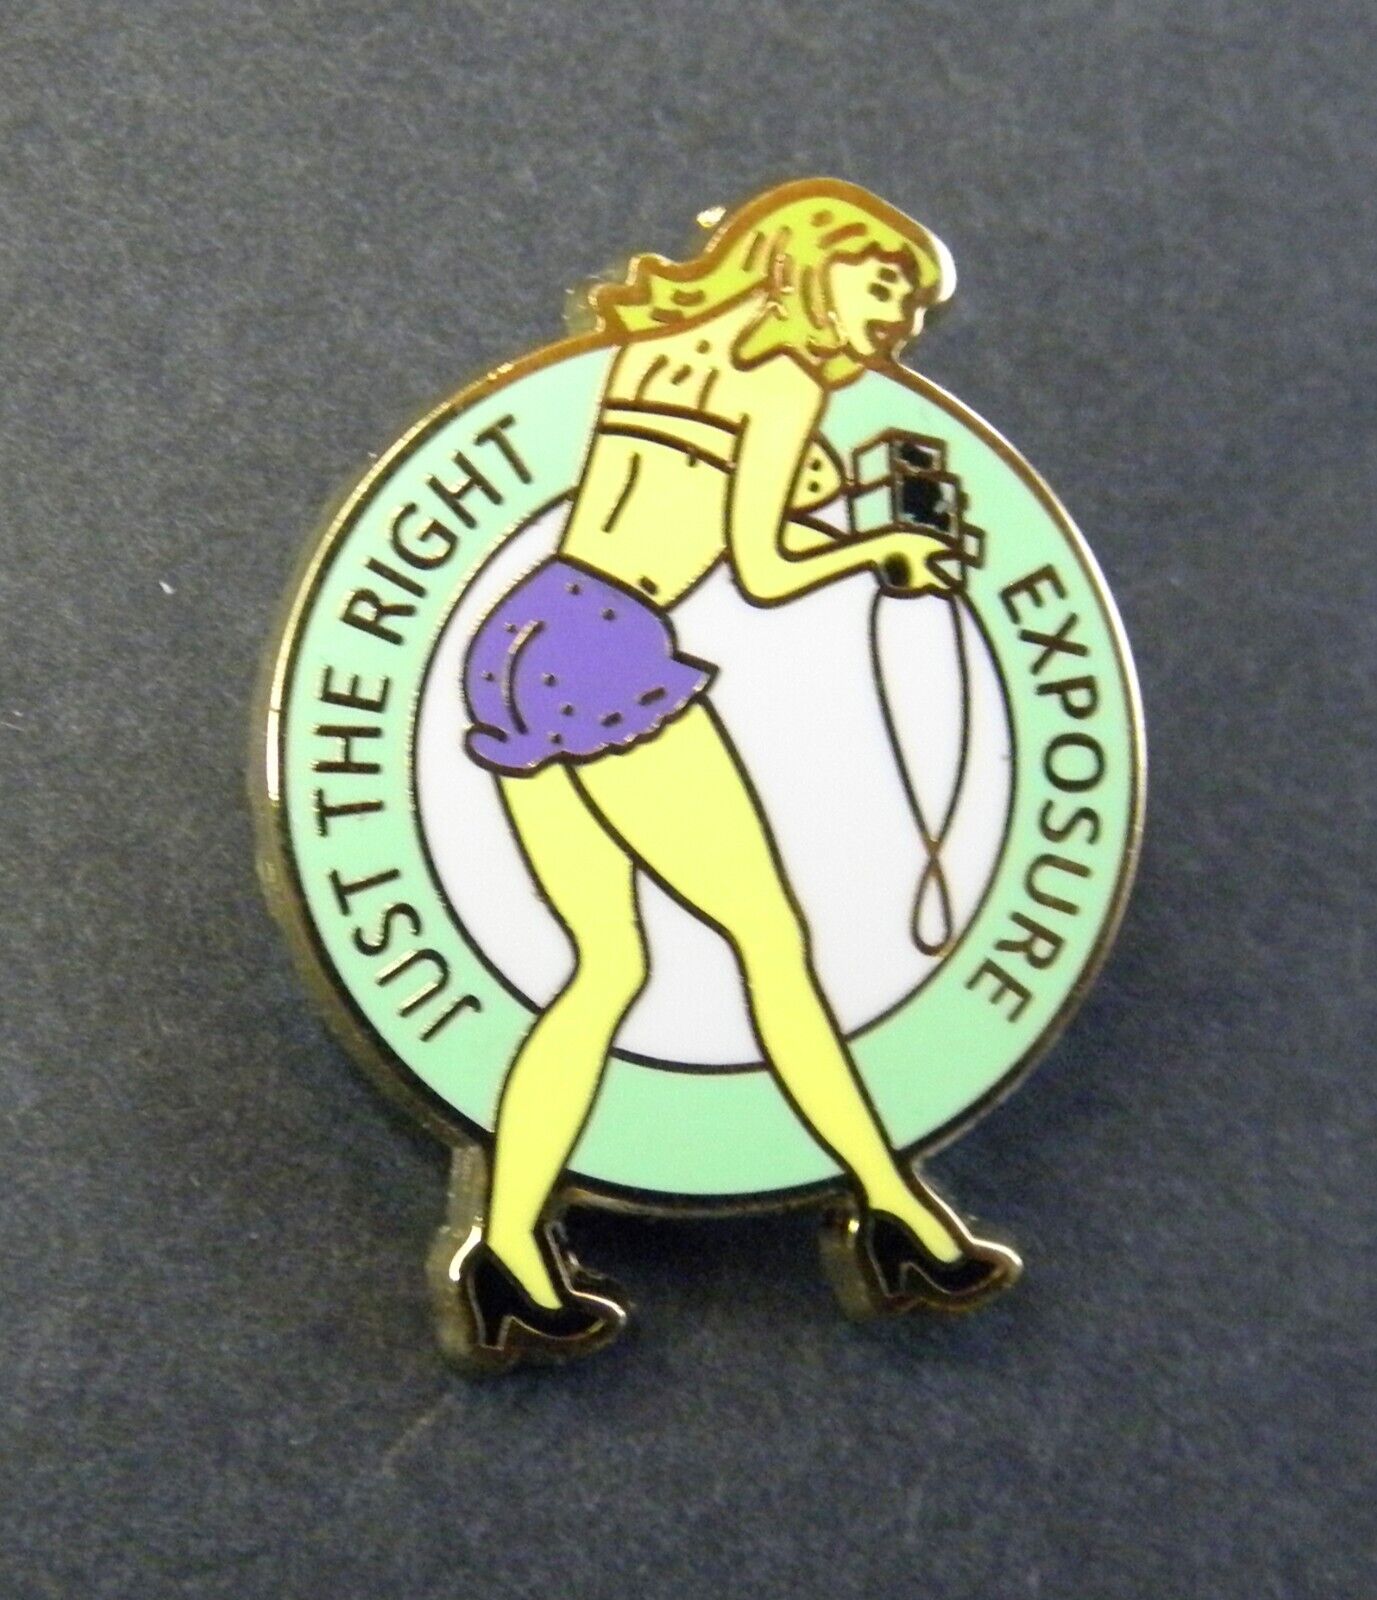 JUST THE RIGHT EXPOSURE AIR FORCE PINUP GIRL LAPEL HAT PIN BADGE 1 x 1.25 INCHES